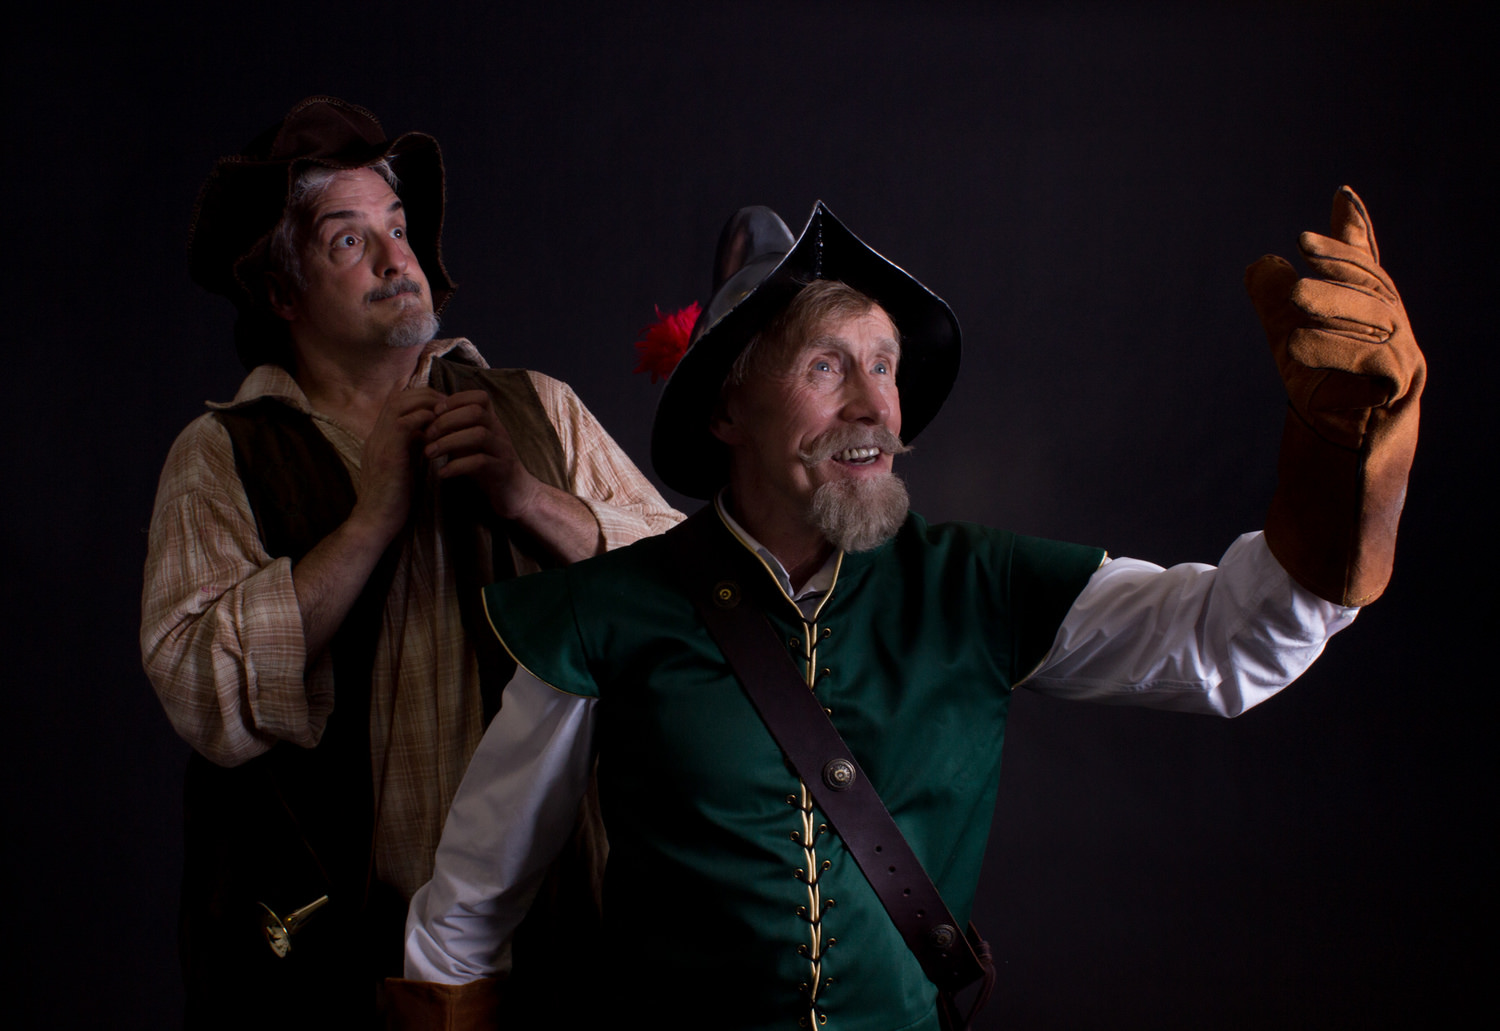 From left to right: Chris Finetti (Sancho Panza) and Richard Howarter (Cervantes/Quijana/Don Quixote) star in the Ghostlight Theatre Ensemble production of 